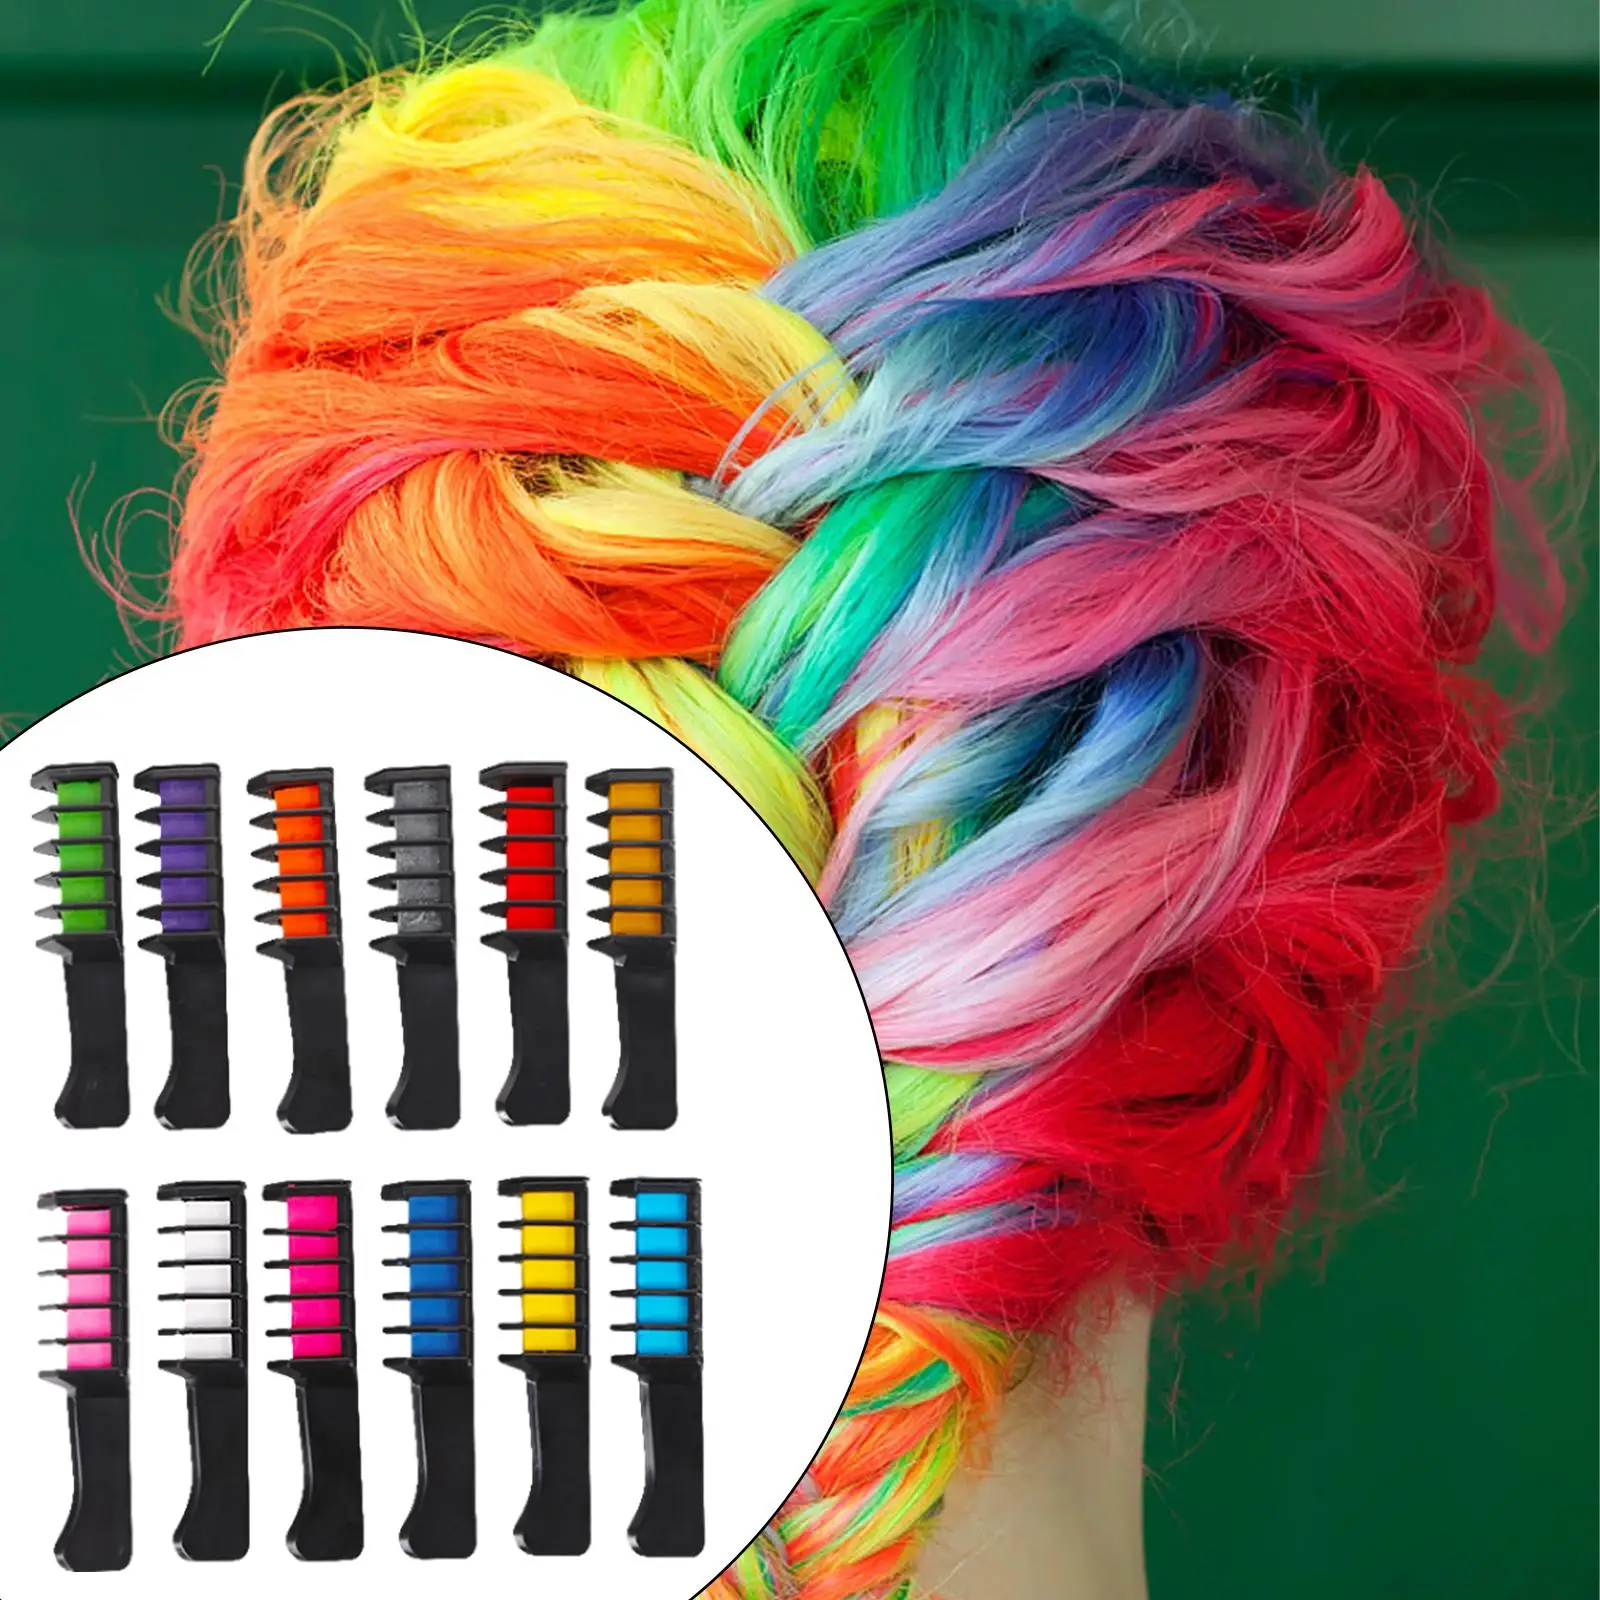 12 Pieces Disposable Hair Dyeing Combs Styling Accessory 12 Colors Temporary Hair Color Chalk Comb Hair Highlights for Cosplay